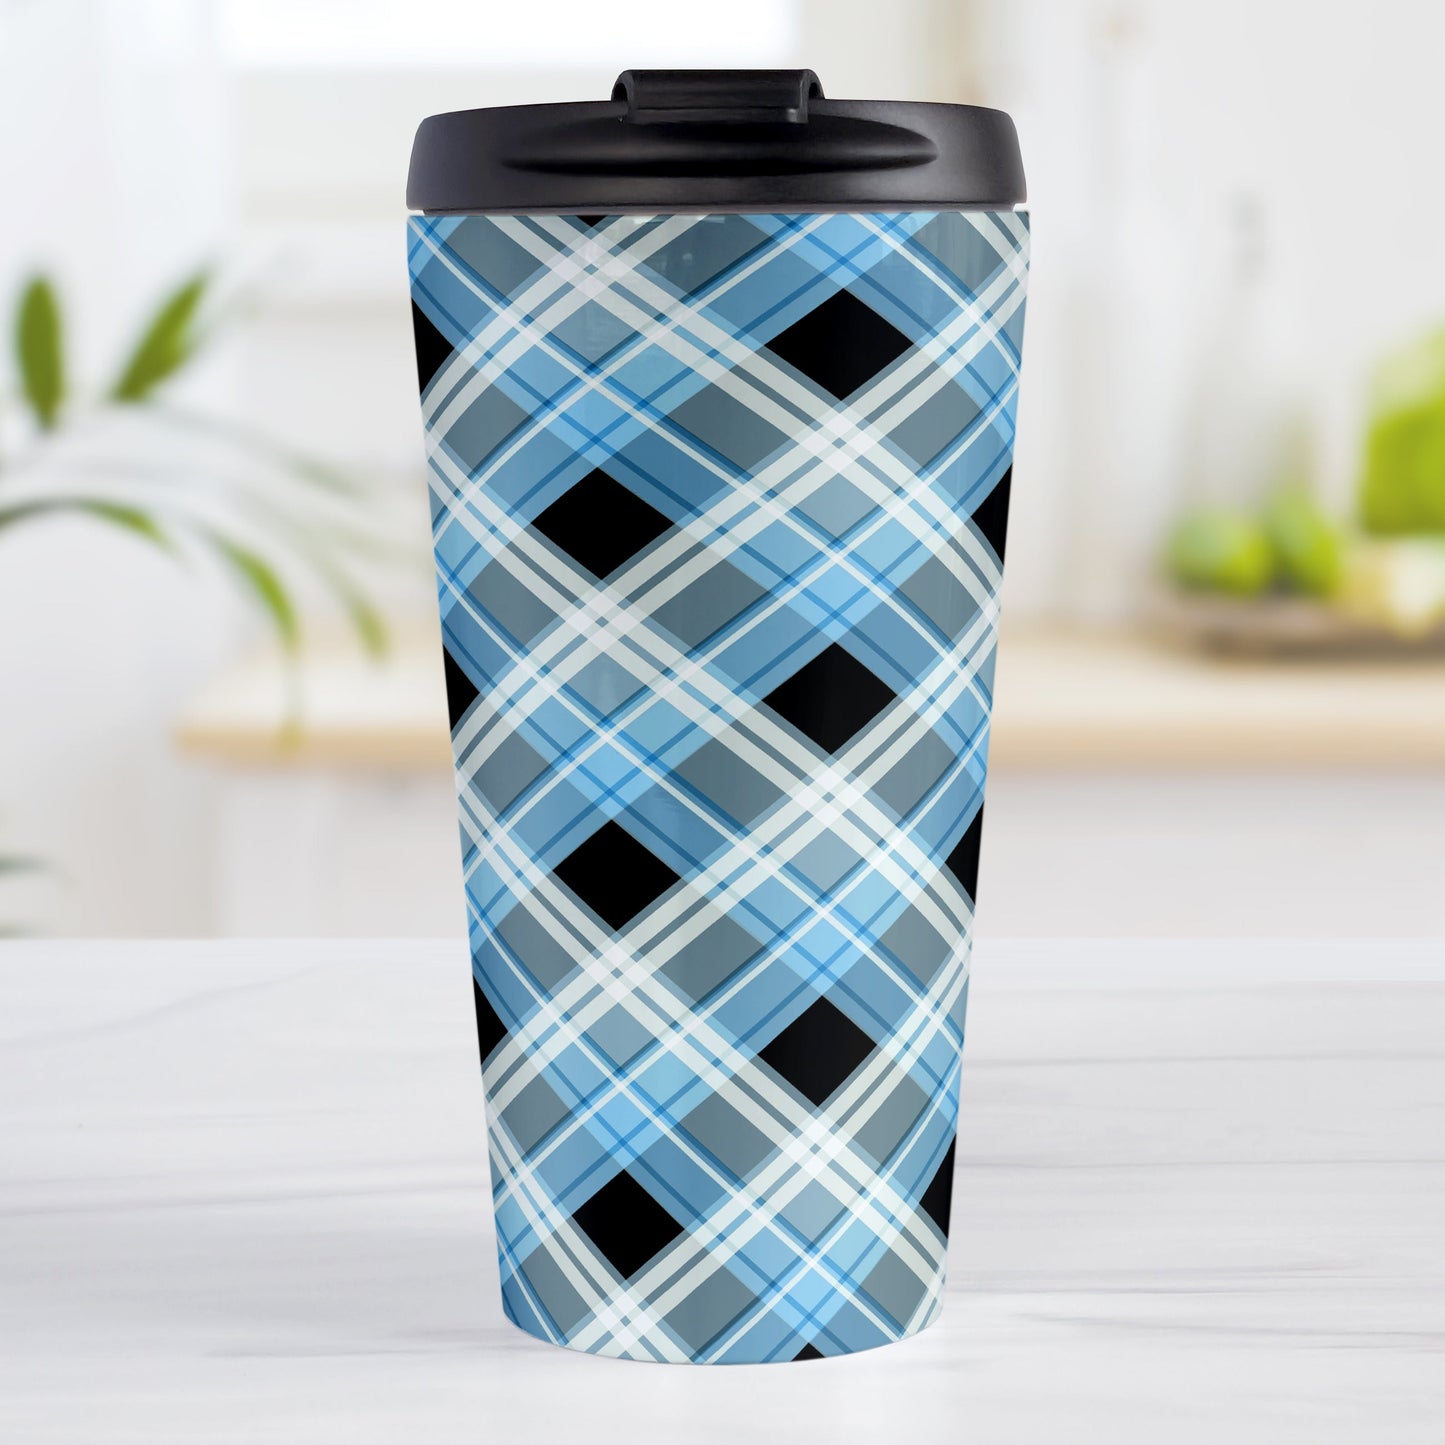 Alternative Blue Plaid Travel Mug (15oz) at Amy's Coffee Mugs. A stainless steel travel mug designed with a diagonal blue, black, and white plaid pattern that wraps around the mug. Designed for someone who likes plaid patterns and loves the color blue.